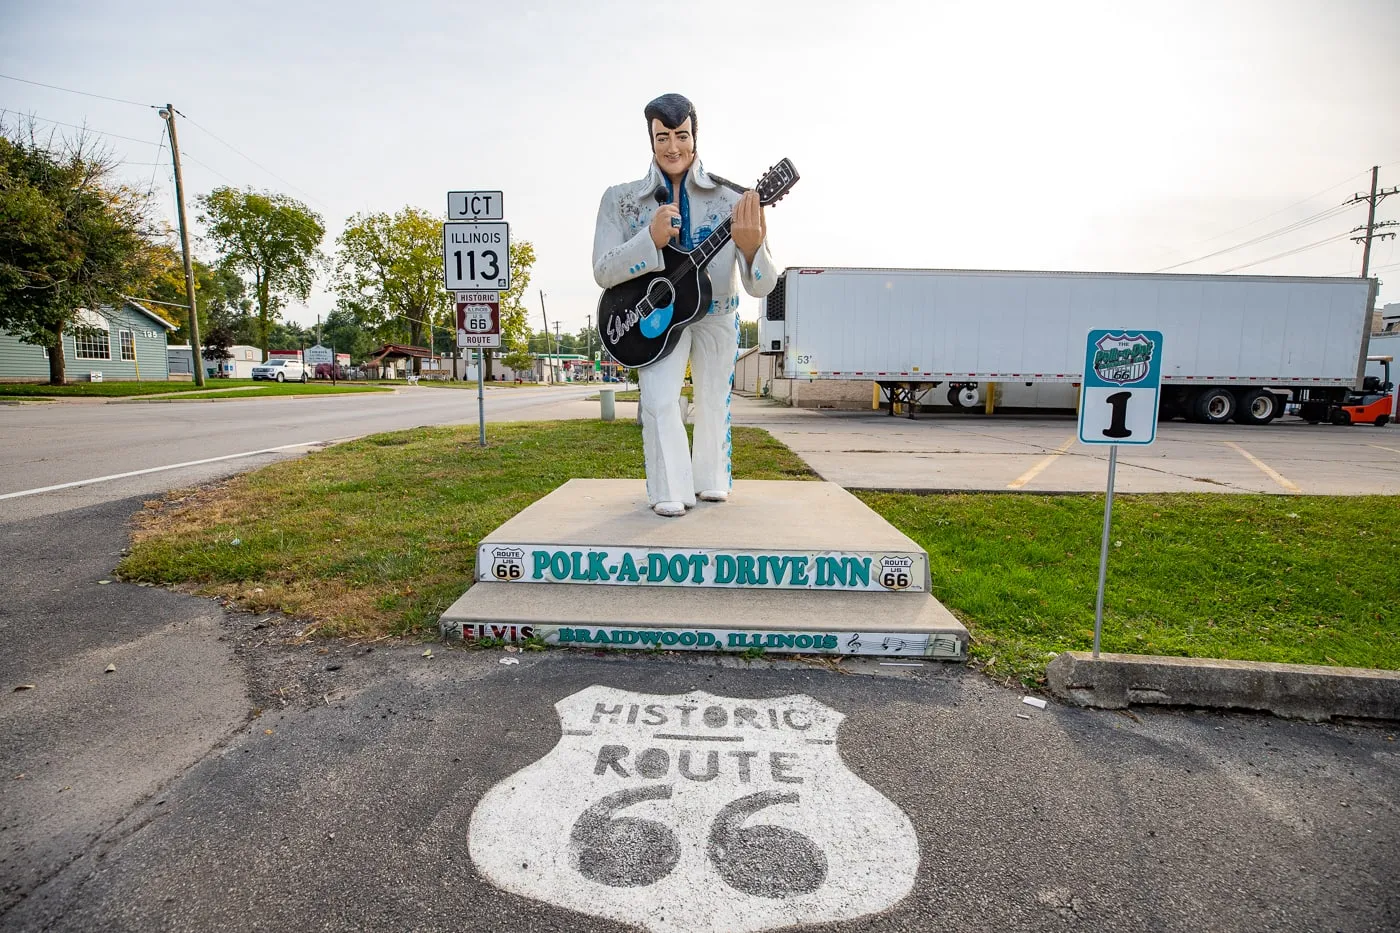 Elvis Statue photo op at the Route 66 Polk-a-Dot Drive In in Braidwood, Illinois